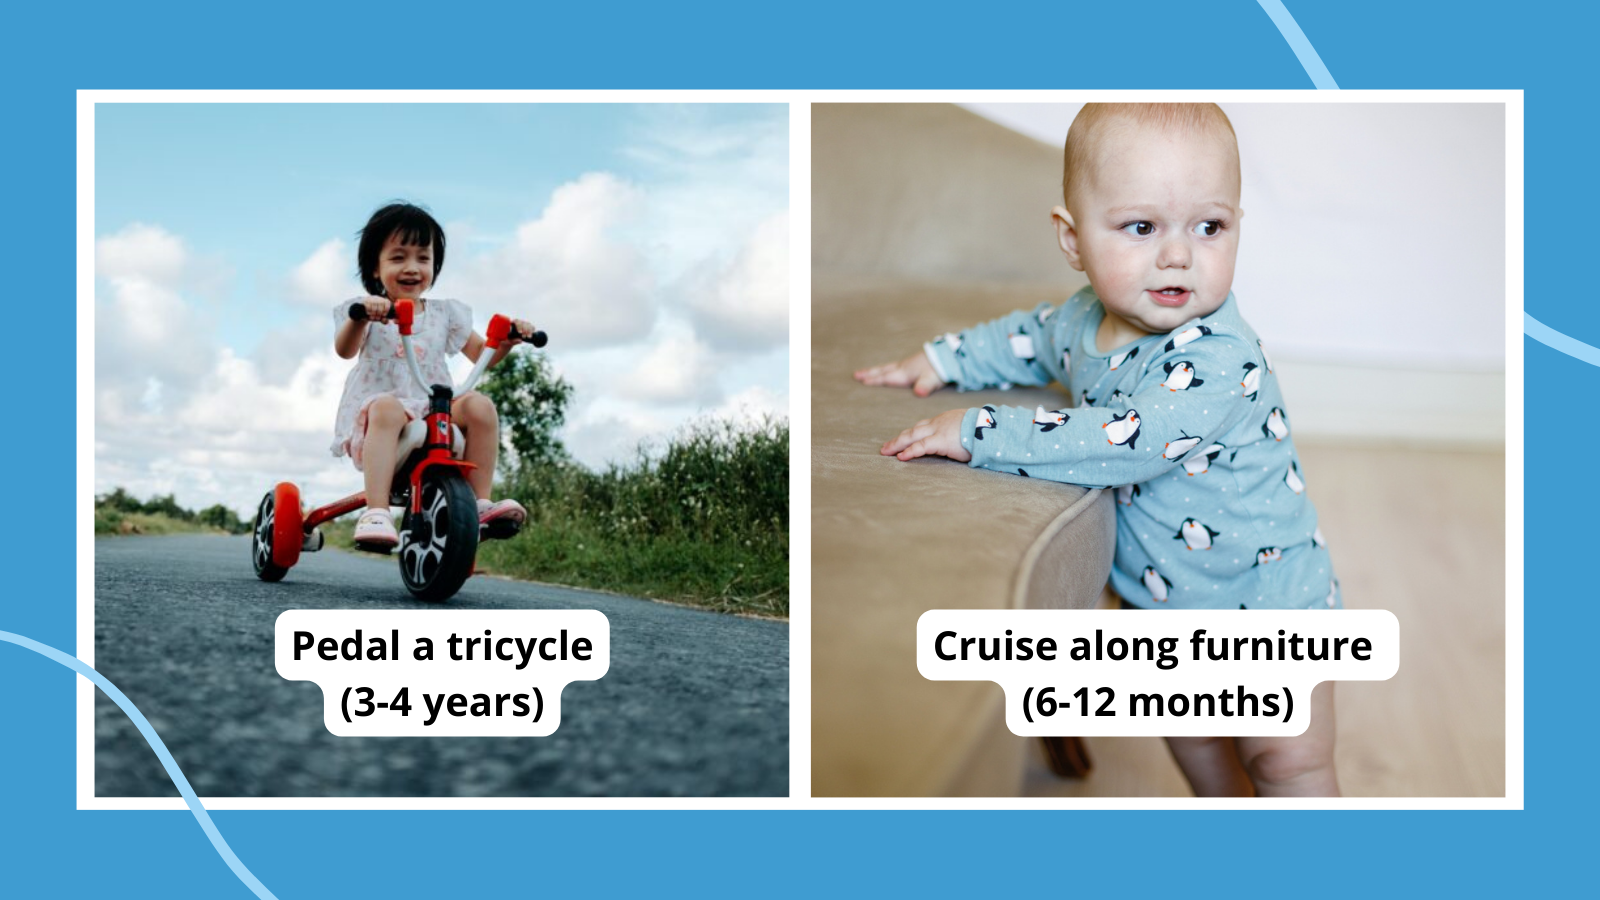 Example of gross motor skills, including a 3-4 year old girl pedaling a tricycle and a 6-12 month old baby cruising on furniture.